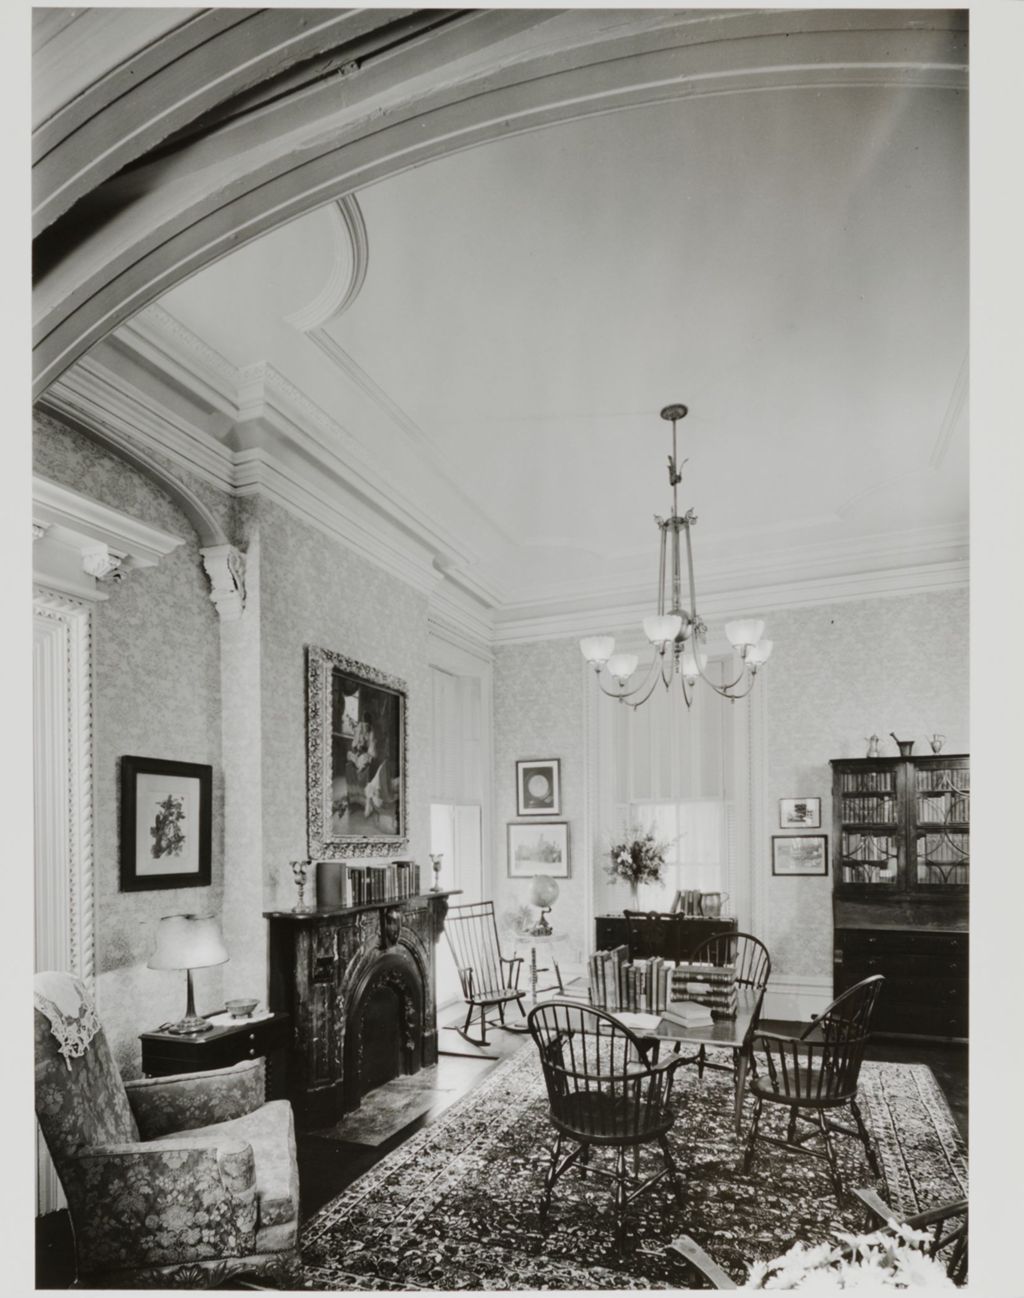 Miniature of West parlor room prior to restoration, Jane Addams Hull-House Museum